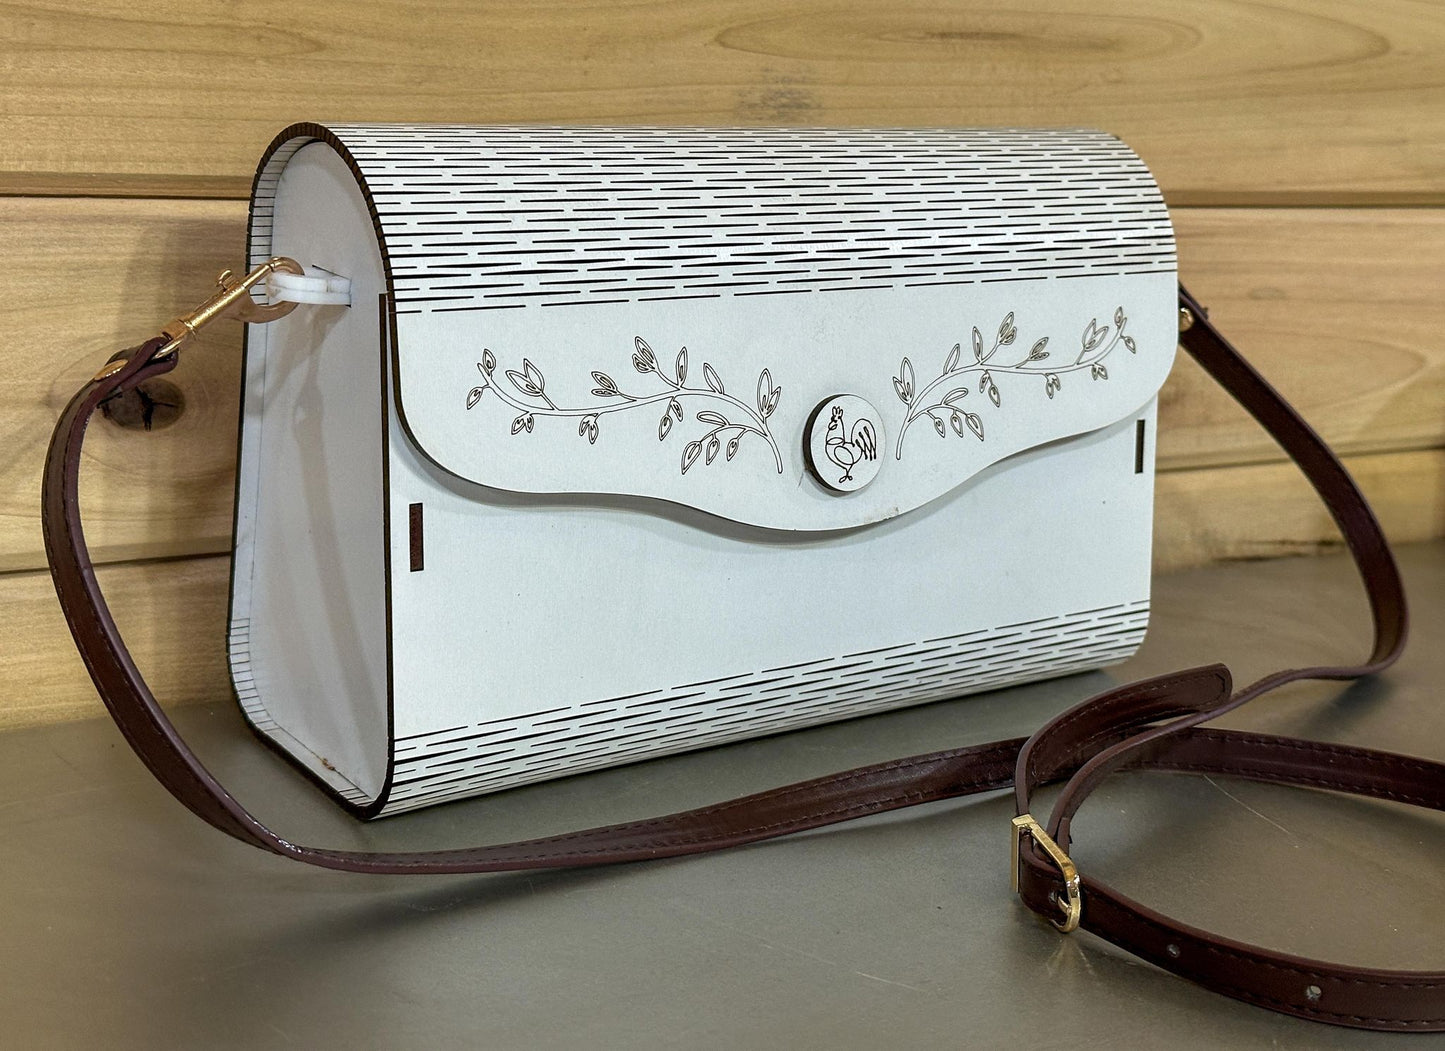 White Wooden Clutch Purse - Great for a special occasion!  OOPS!  Has dirty fingerprints on it!